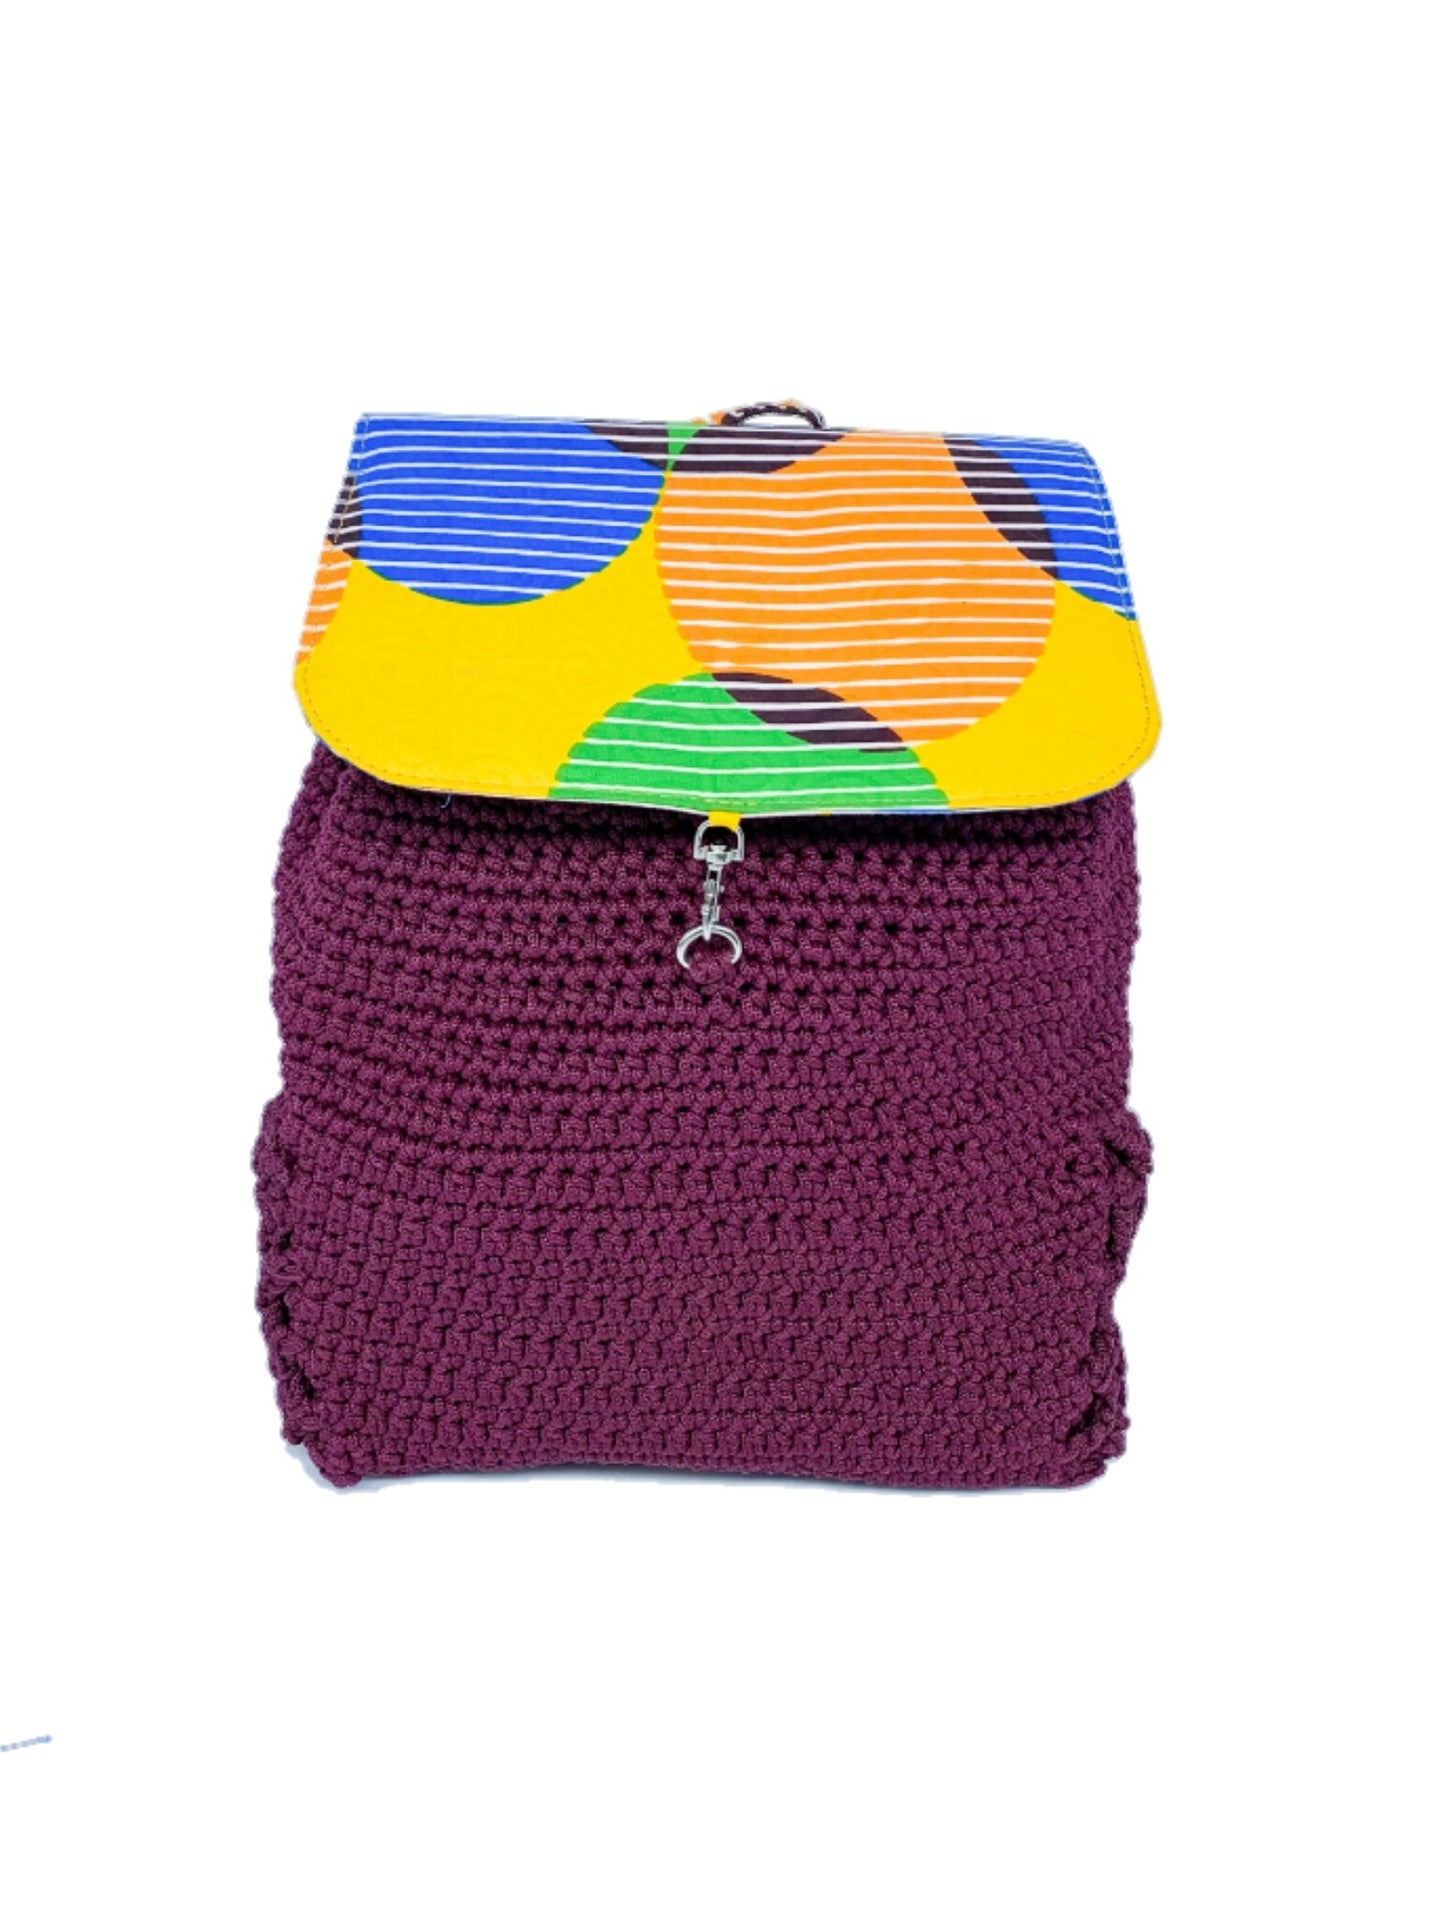 Bea Handcrafted Crochet Backpack: Boho Style with Plenty of Room for Adventure